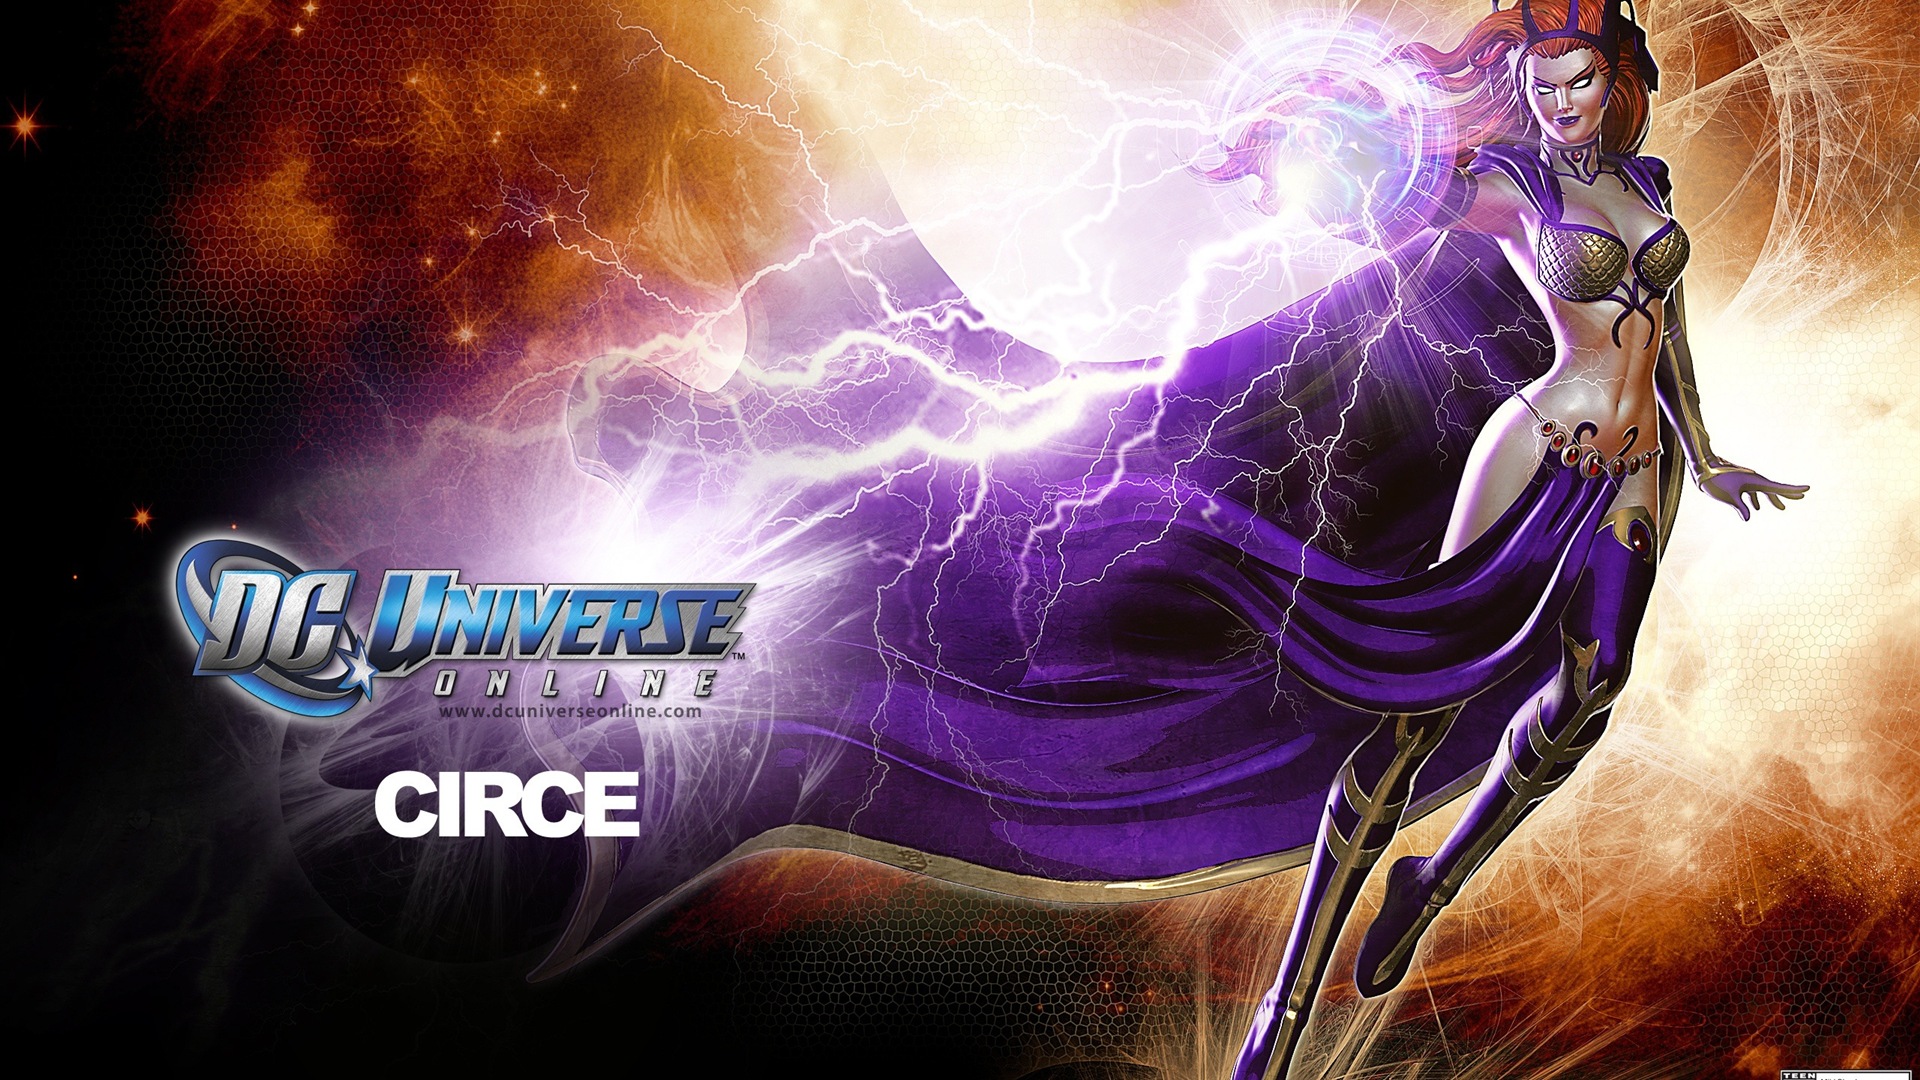 DC Universe Online HD game wallpapers #7 - 1920x1080